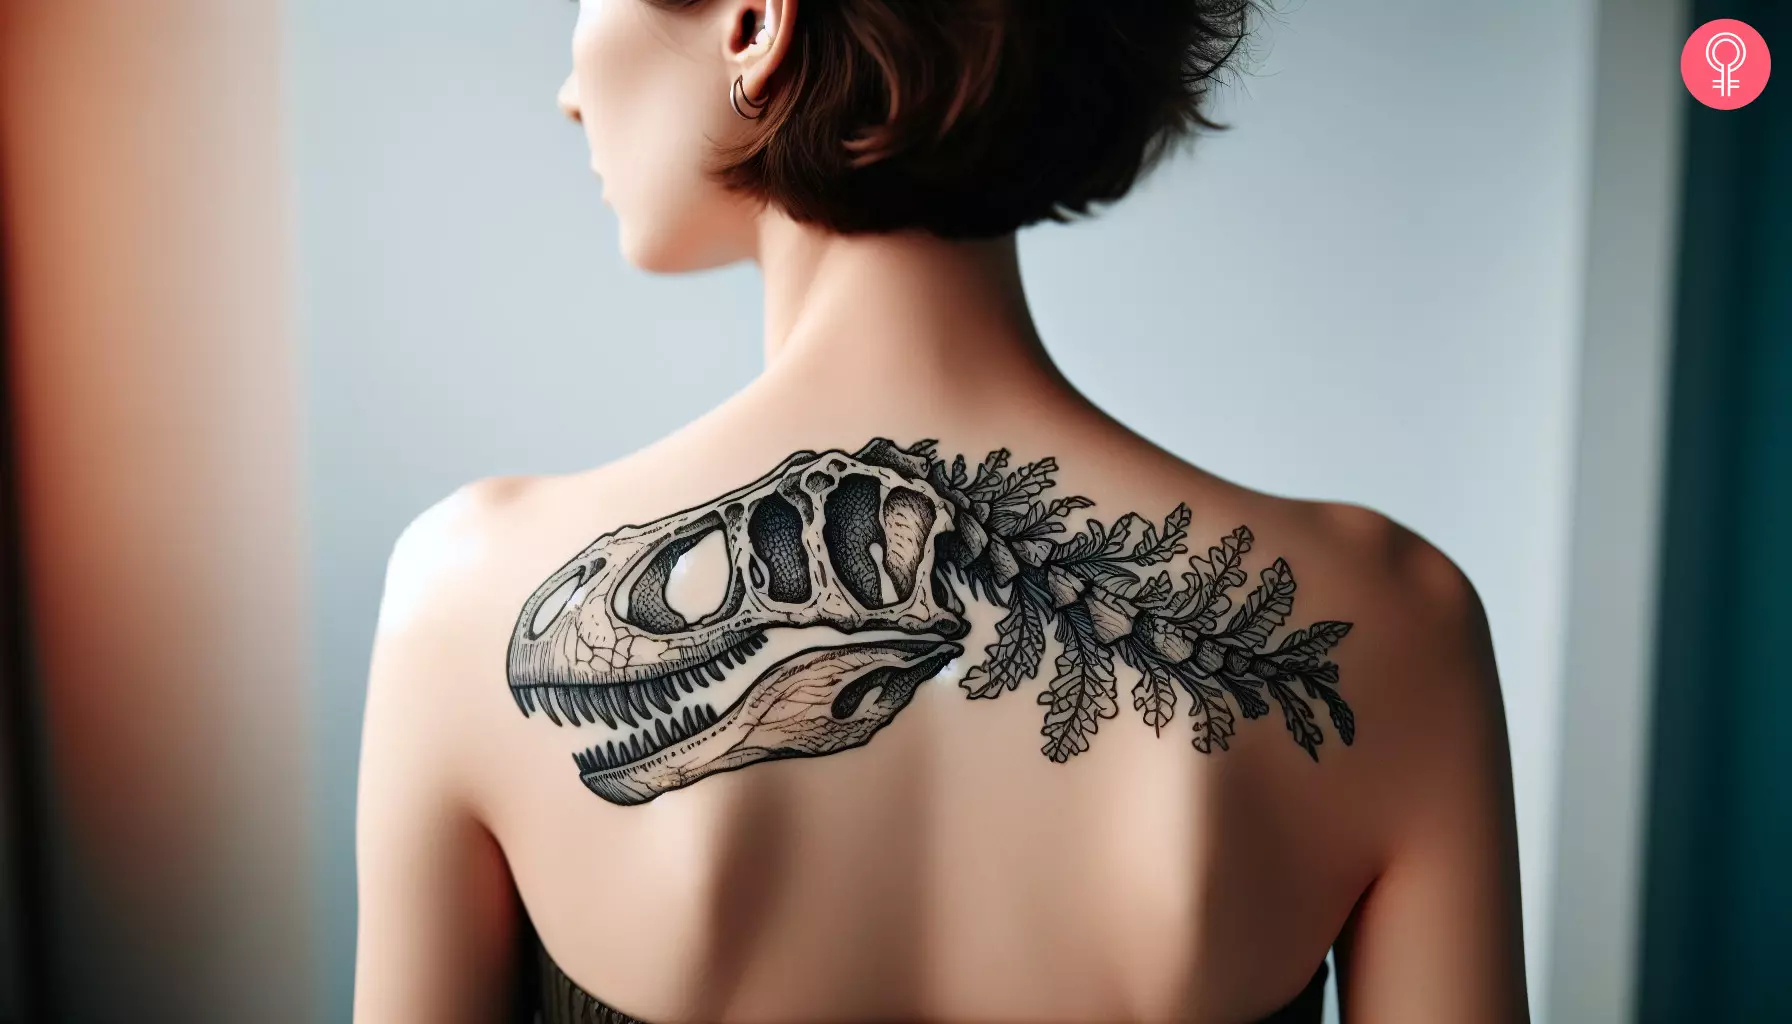 Woman with dinosaur skull tattoo on her upper back